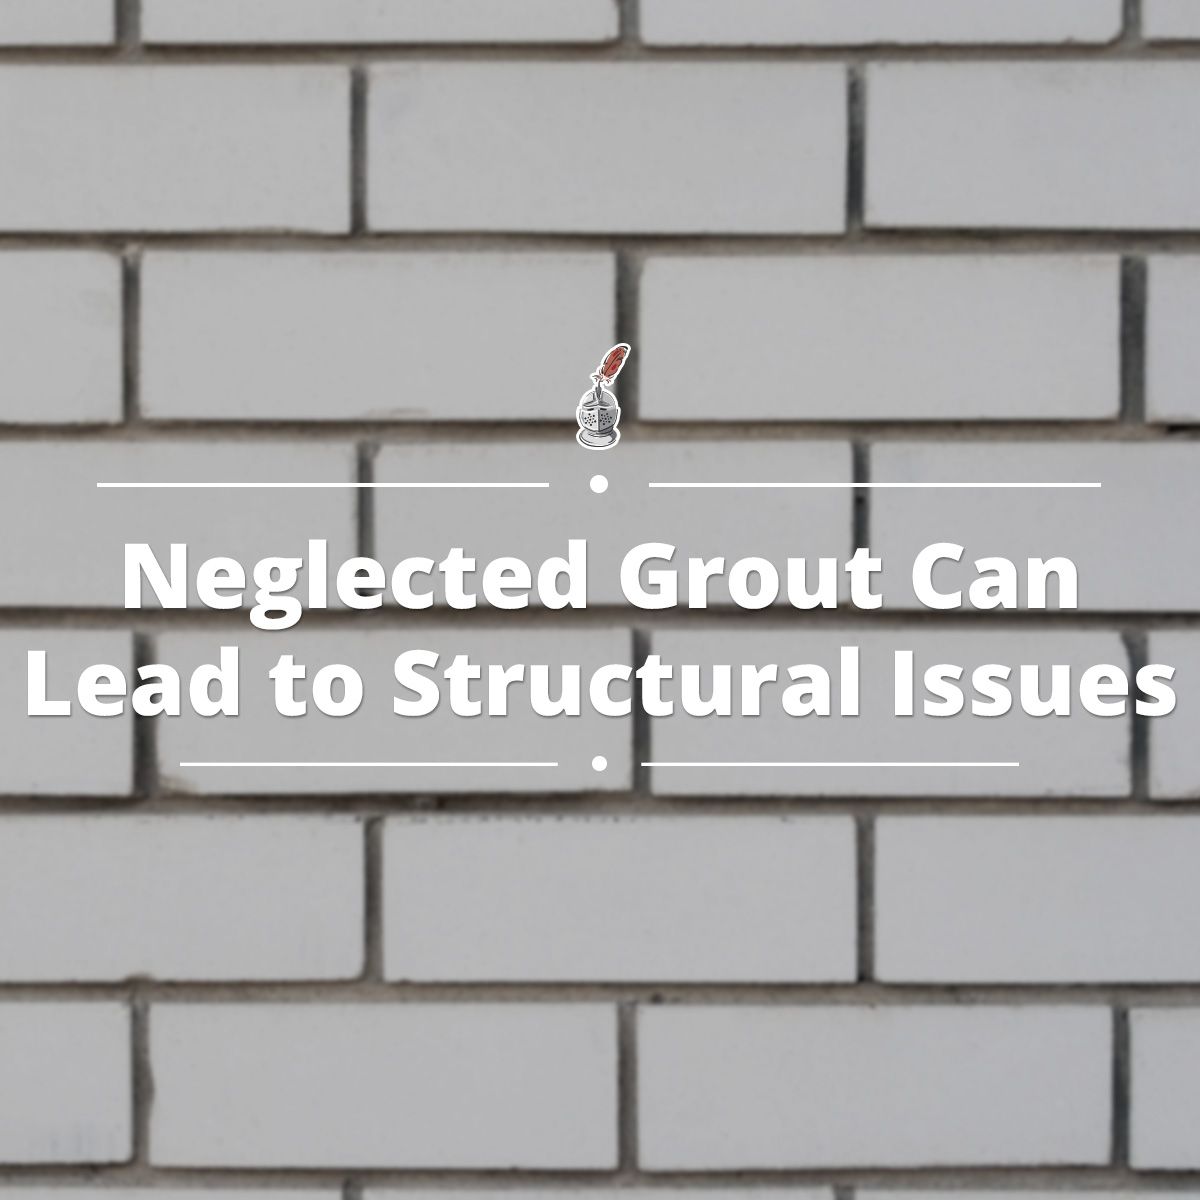 Neglected Grout Can Lead to Structural Issues